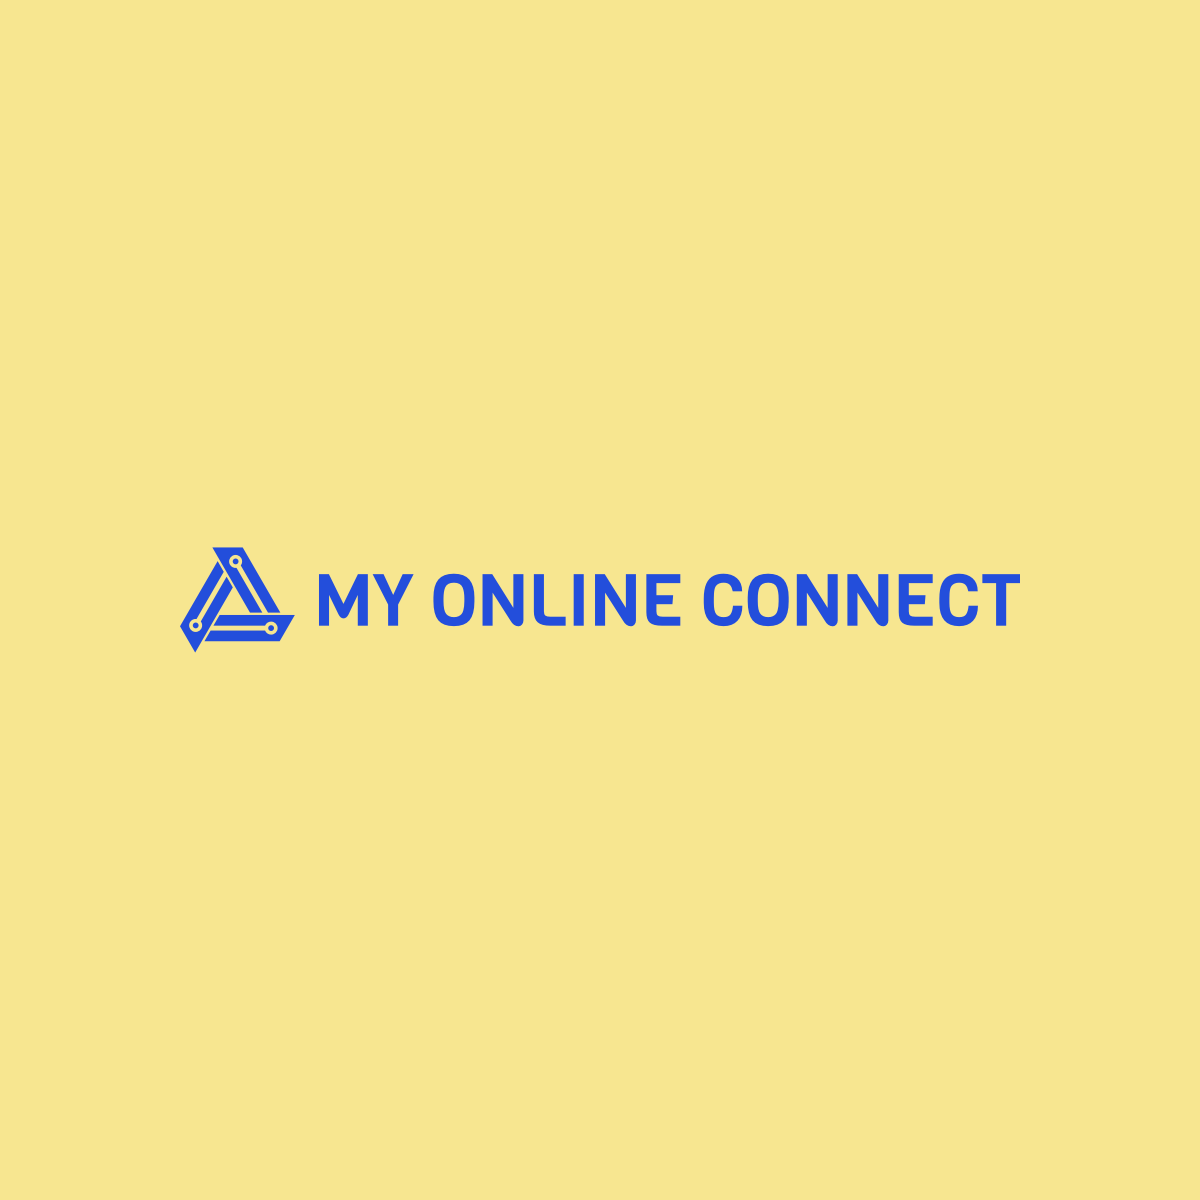 My Online Connect